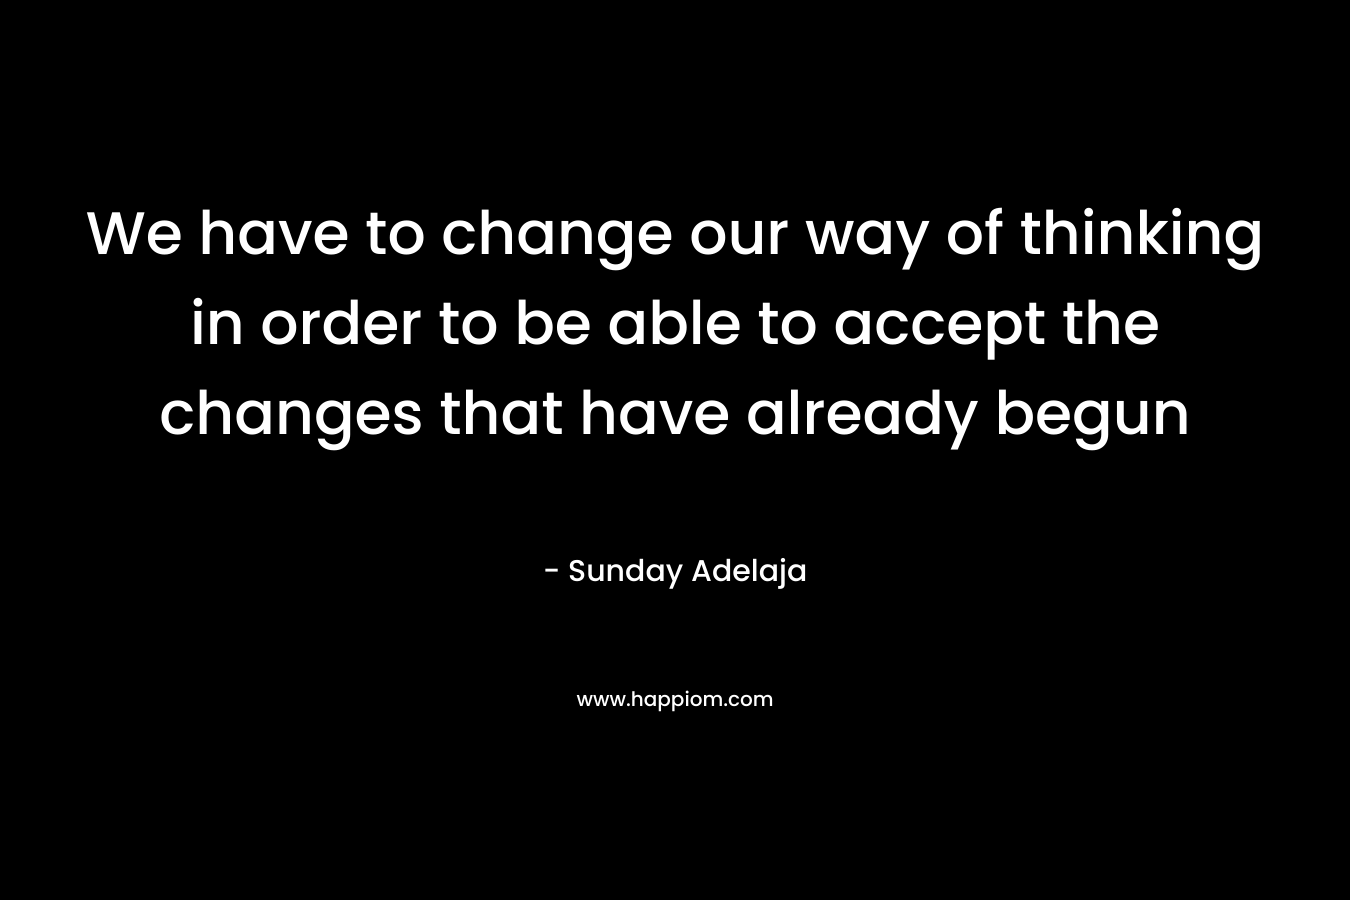 We have to change our way of thinking in order to be able to accept the changes that have already begun